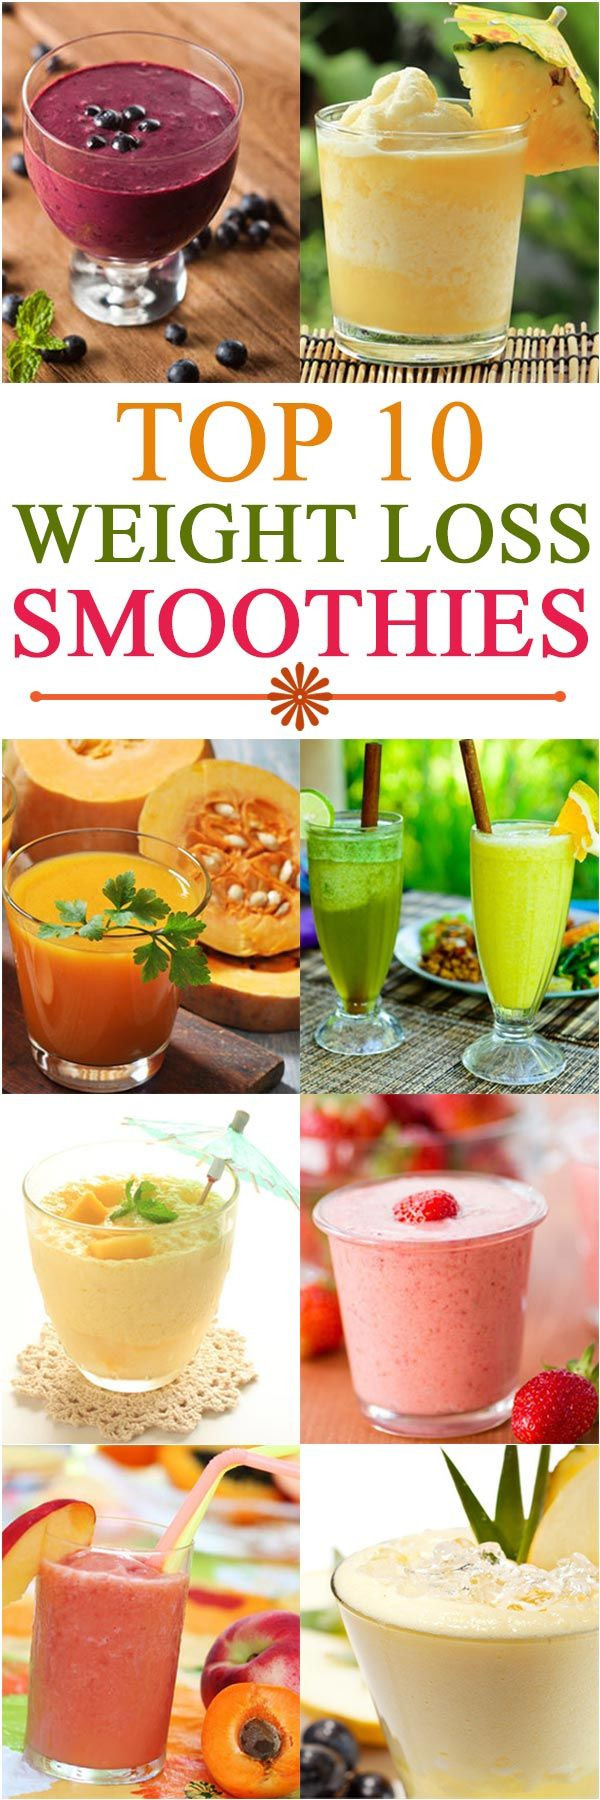 Best Fruit Smoothies For Weight Loss
 21 Weight Loss Smoothies With Recipes